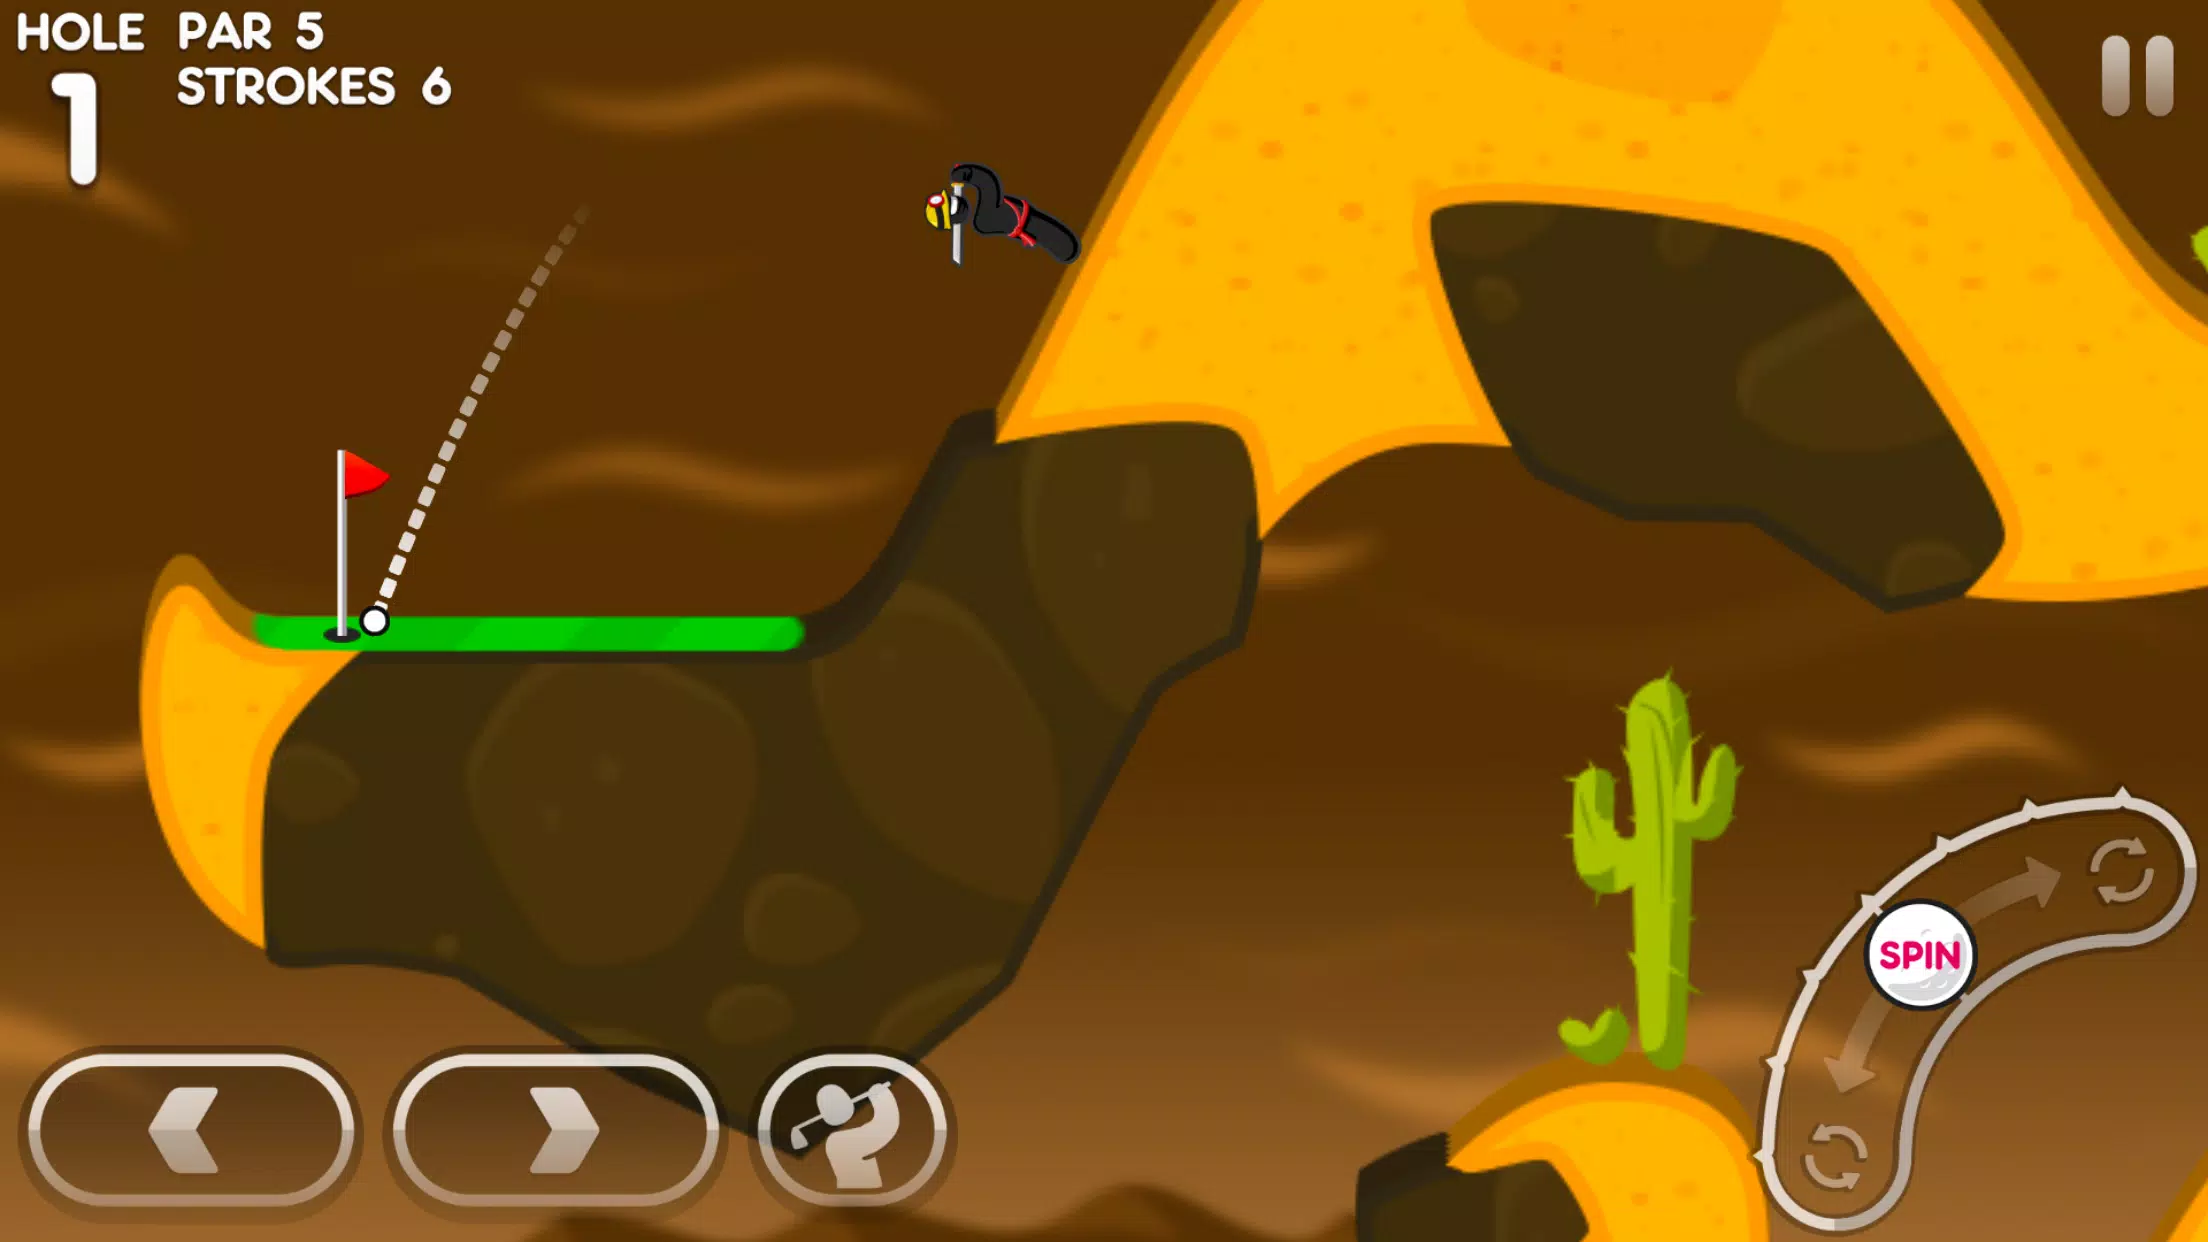 Super Stickman Golf 3 for Android - APK Download